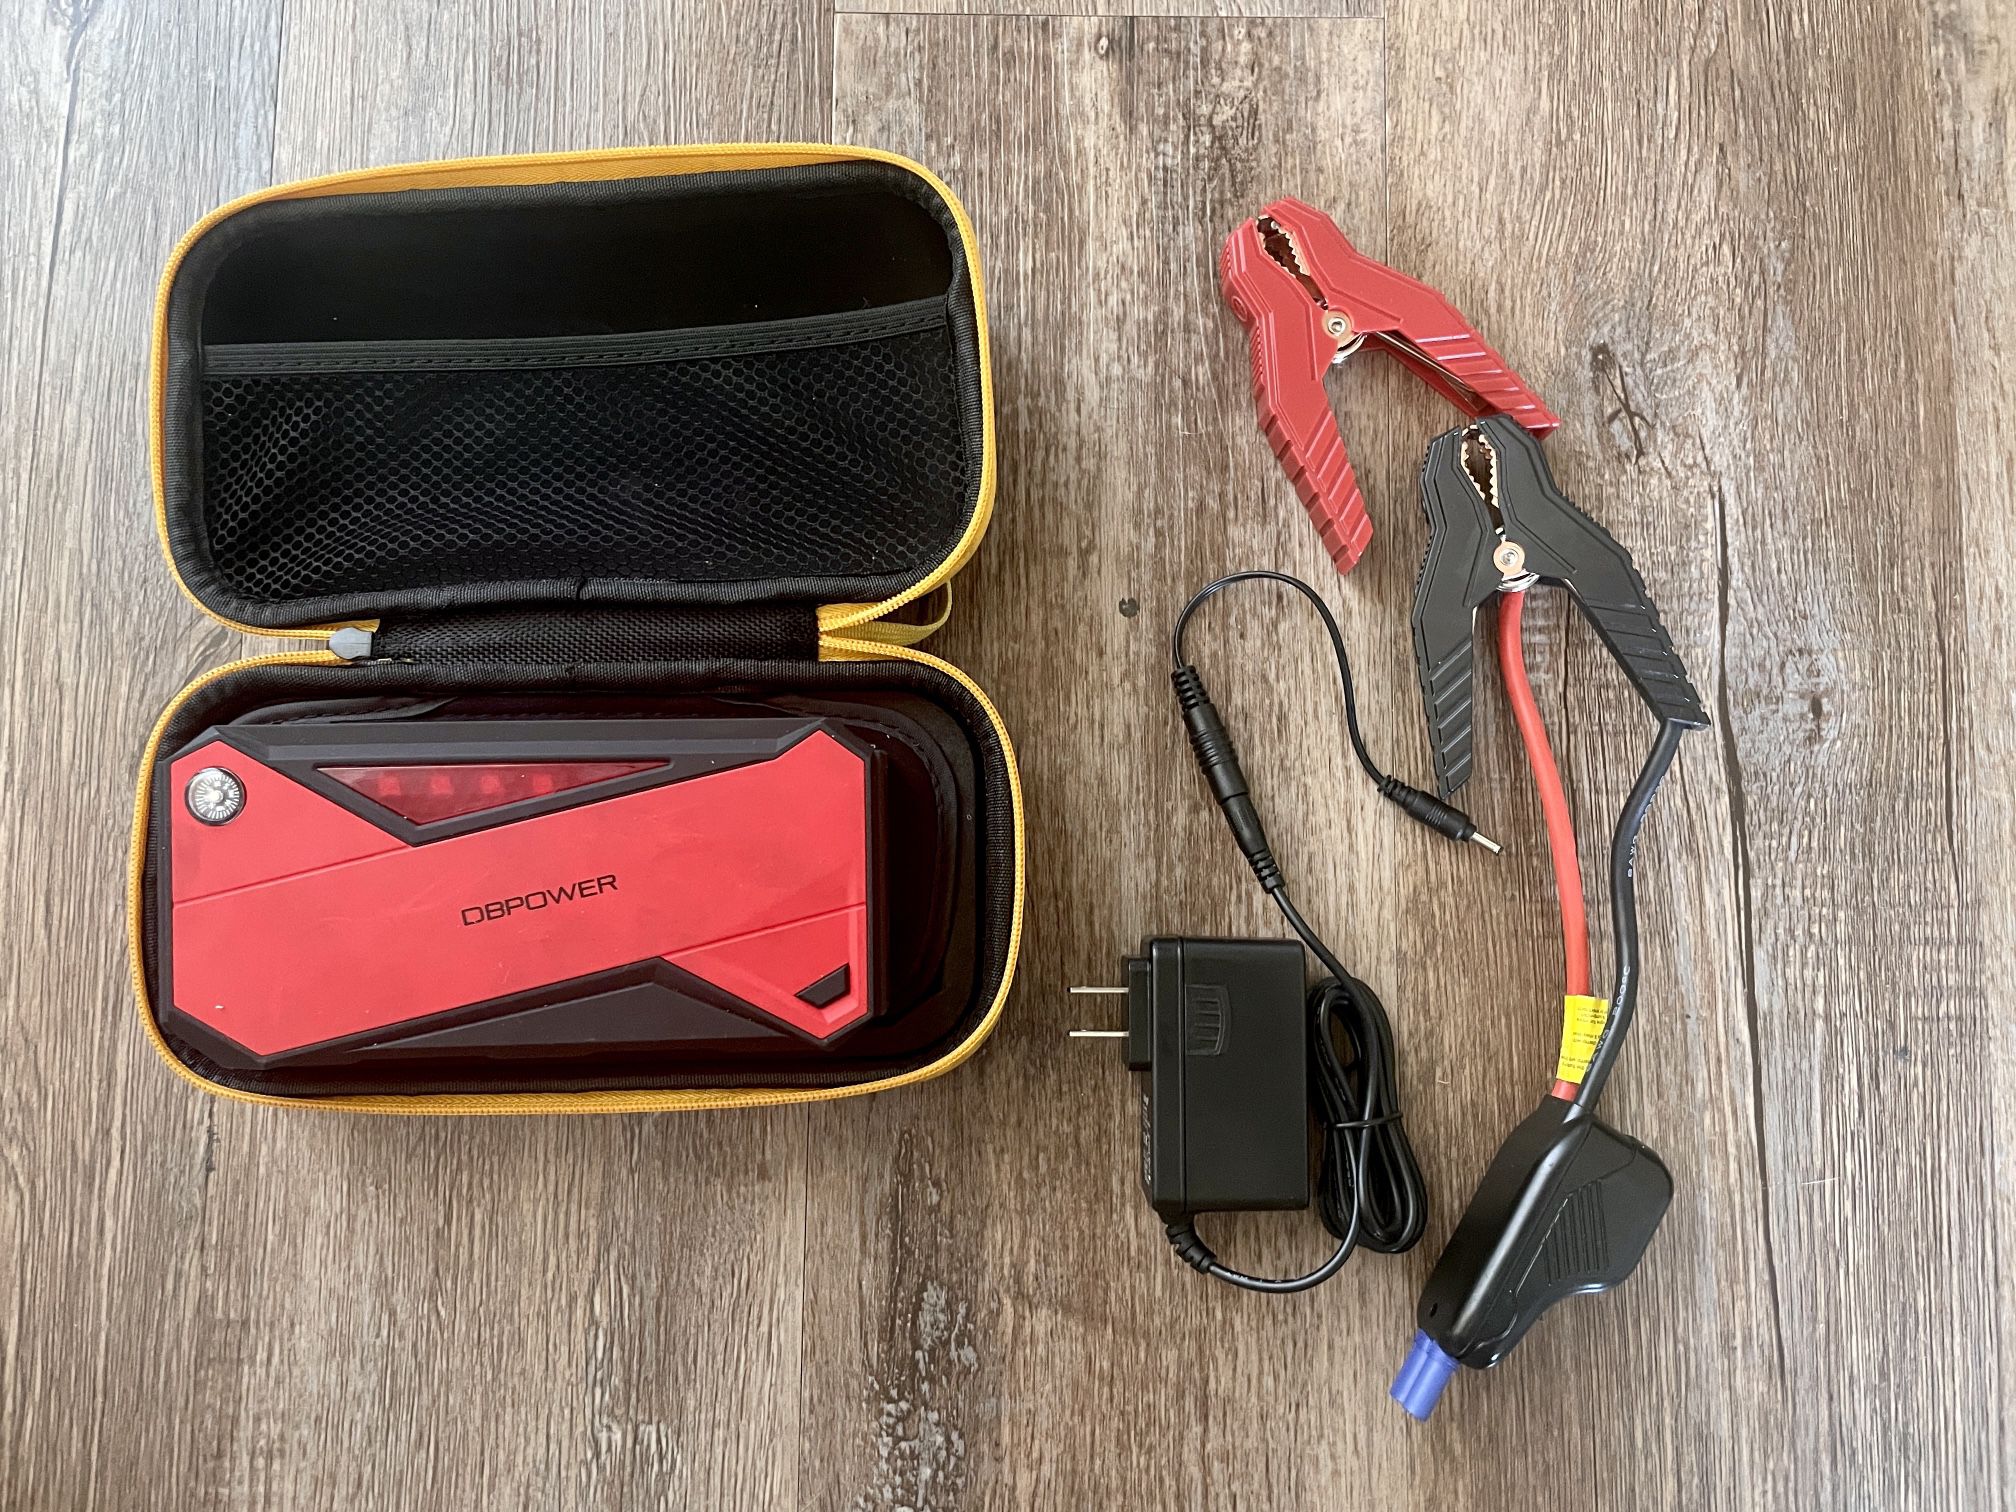 DBPOWER Peak 1600A 18000mAh Portable Car Jump Starter (up to 7.2L Gas, 5.5L Diesel Engine) Battery 